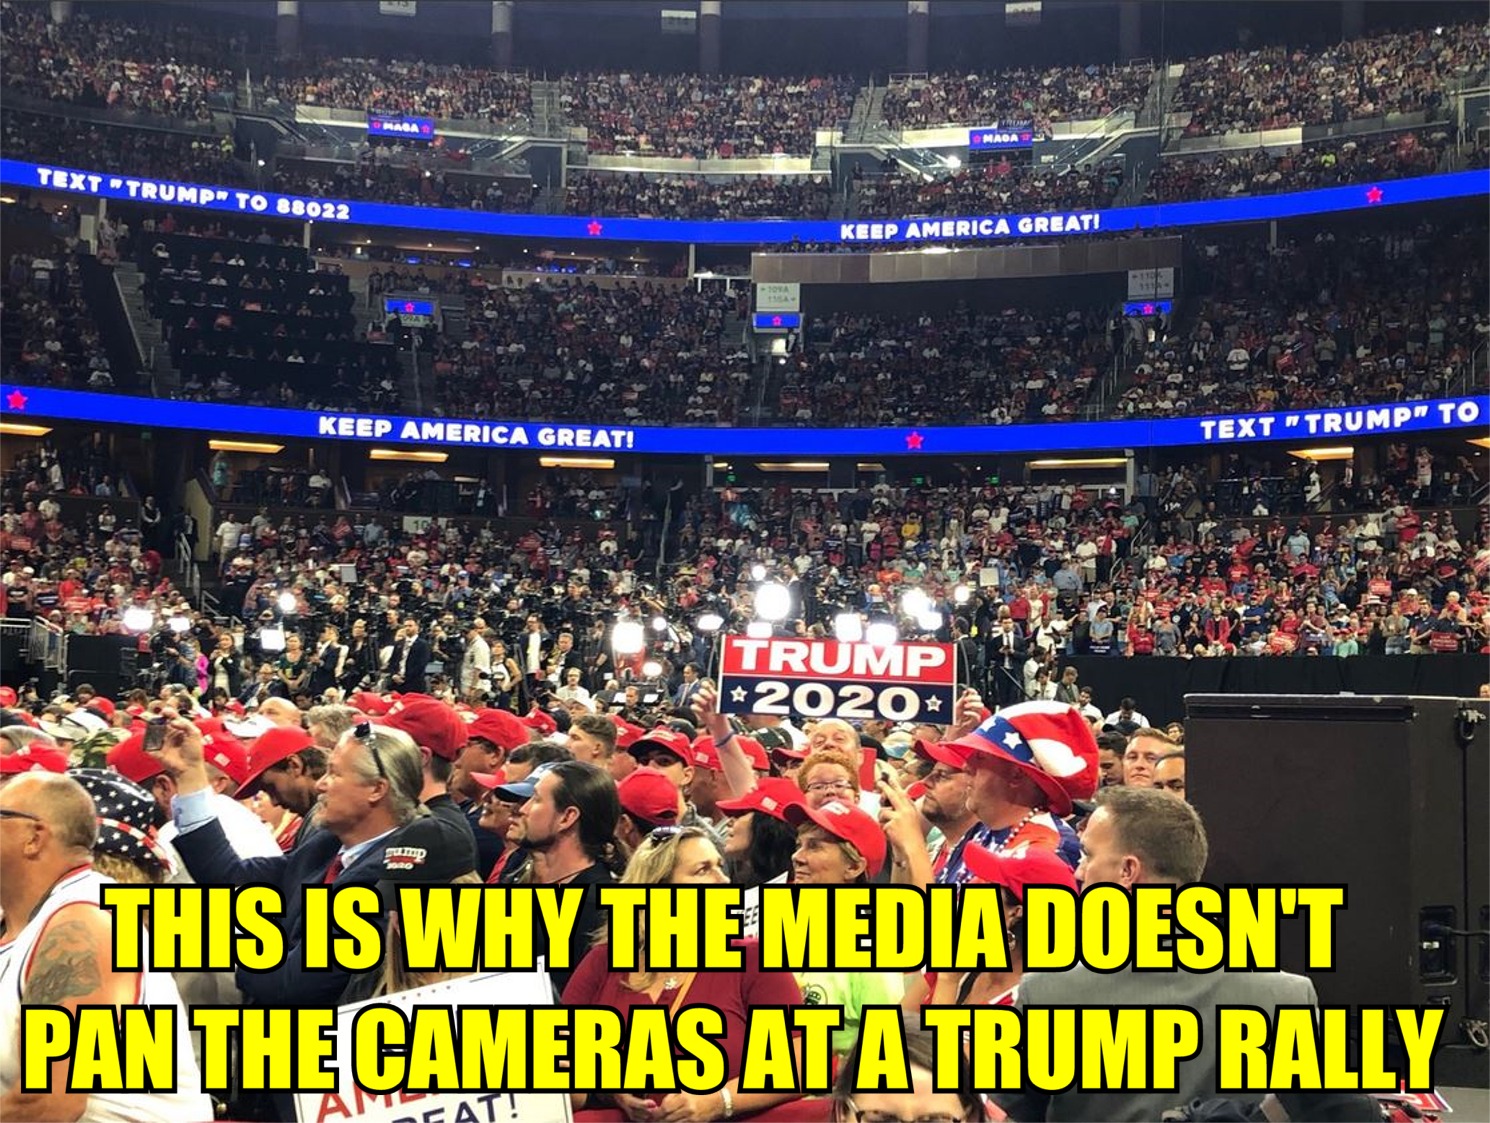 audience - Text Trump To 88022 Keep America Greati Keep America Greati Text Trump" To Tru Im 2020 This Is Why The Media Doesn'T Pan The Cameras At A Trump Rally